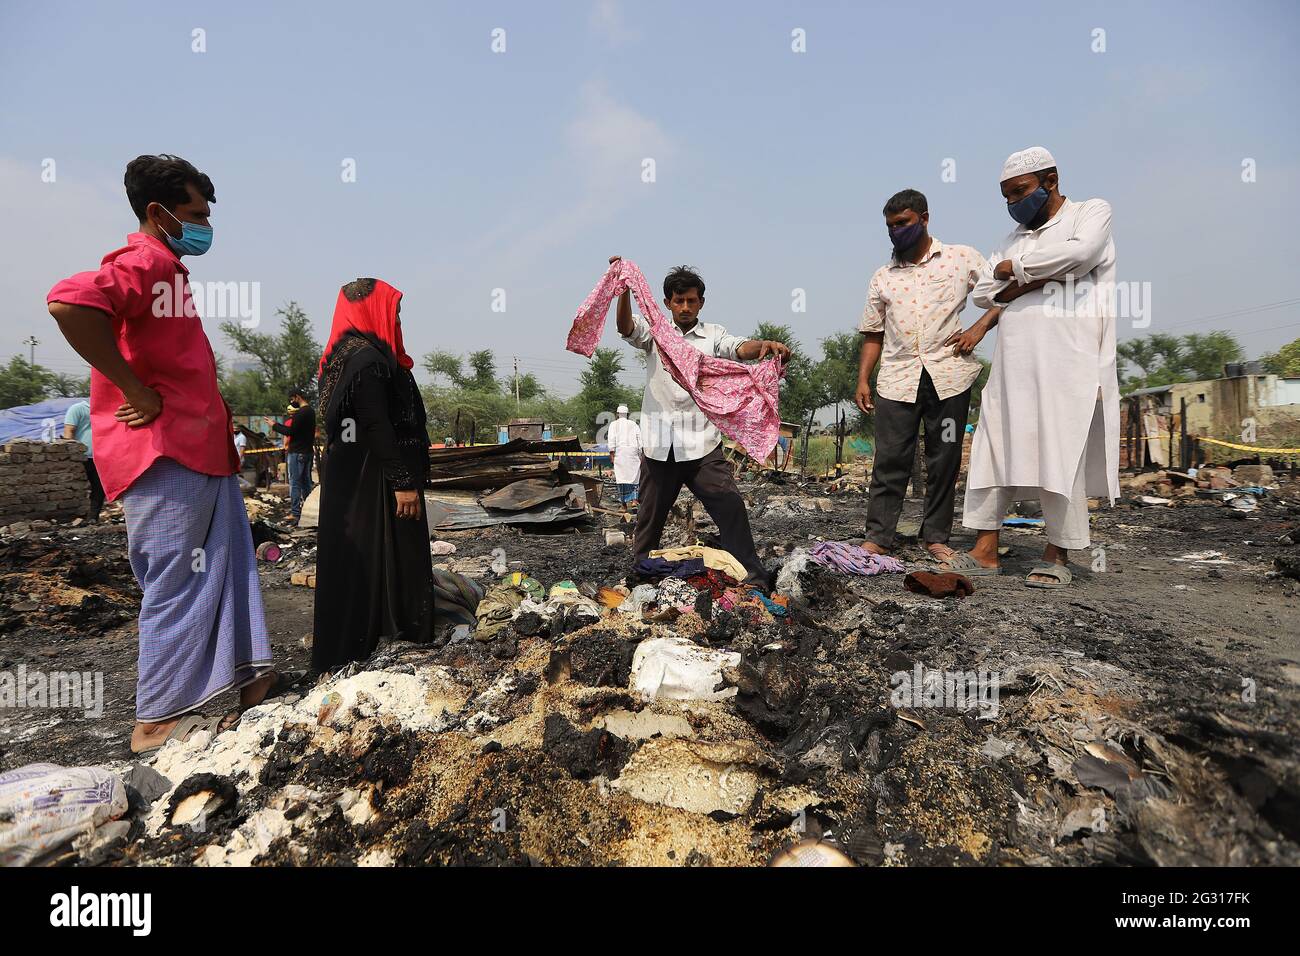 New Delhi, India. 13th June, 2021. Rohingya refugees look around in the charred remains of their camp, during the aftermath. A fire incident broke out at the Rohingya refugee camp leaving over 50 shanties of Rohingya refugees gutted. The cause of the fire has not yet been established. (Photo by Amarjeet Kumar Singh/SOPA Imag/Sipa USA) Credit: Sipa USA/Alamy Live News Stock Photo